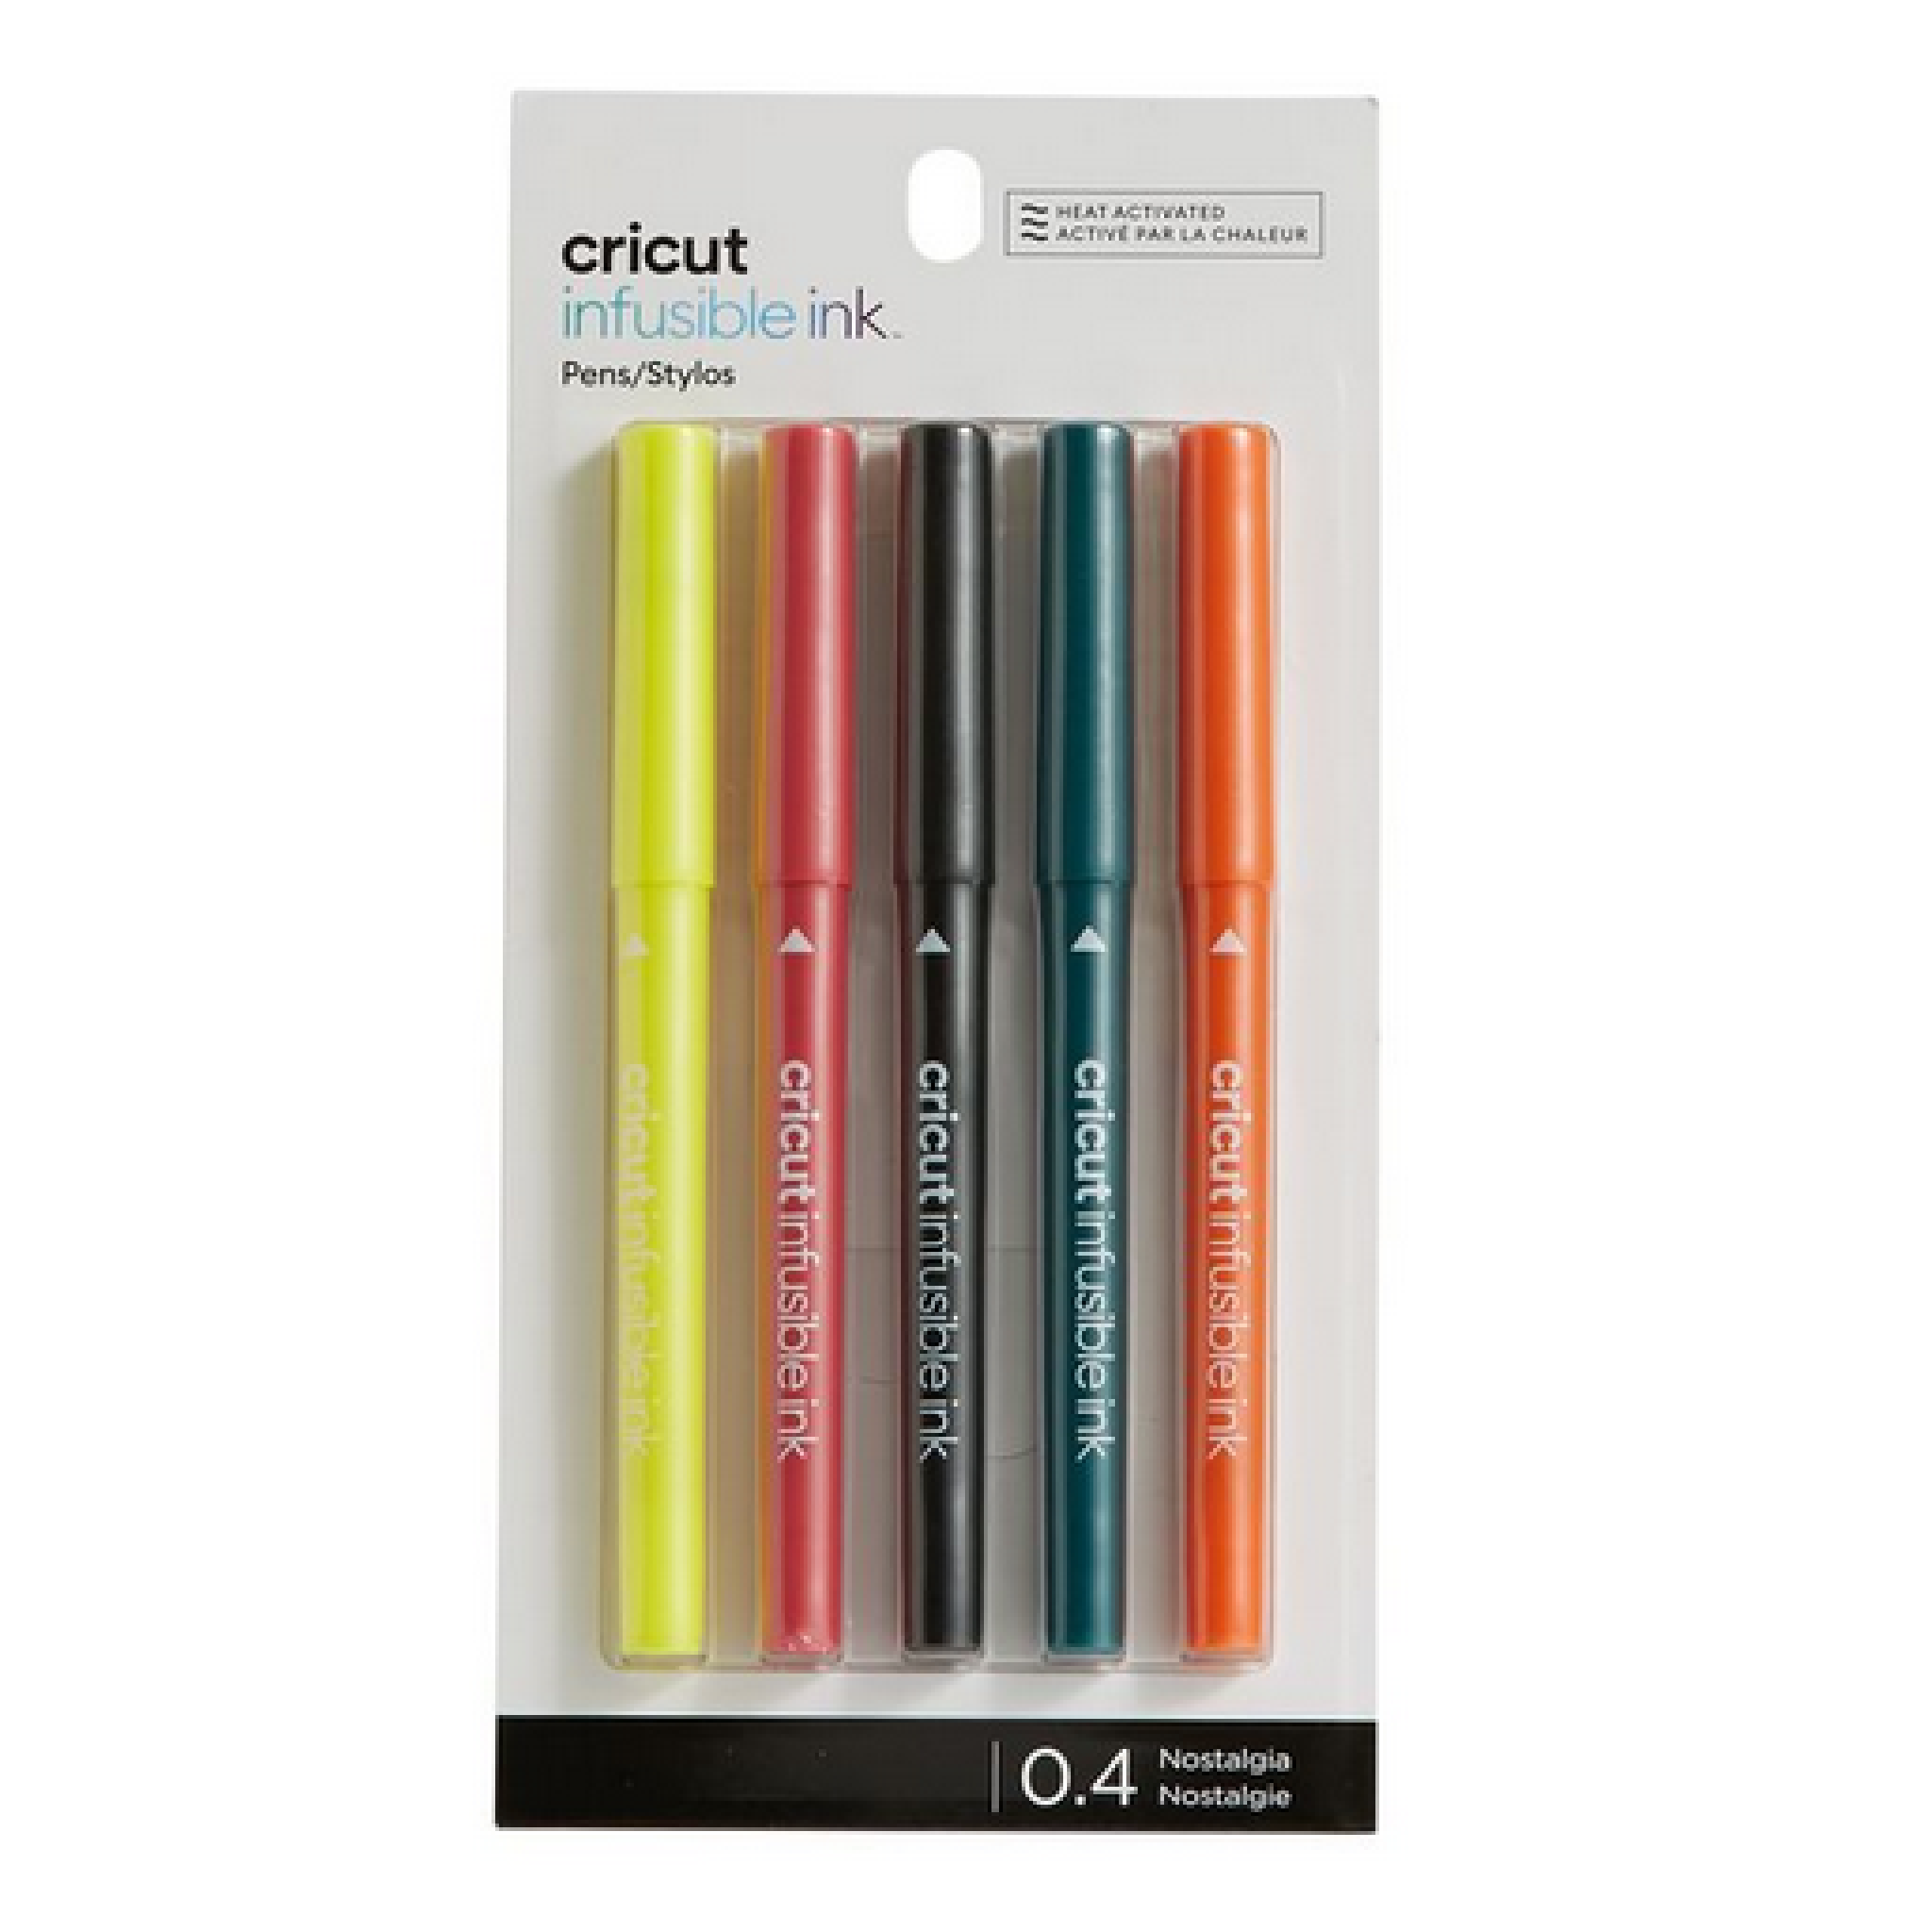 Cricut Infusible Ink™ Pens (0.4), Nostalgia (5 ct) – The Stationery Boutique